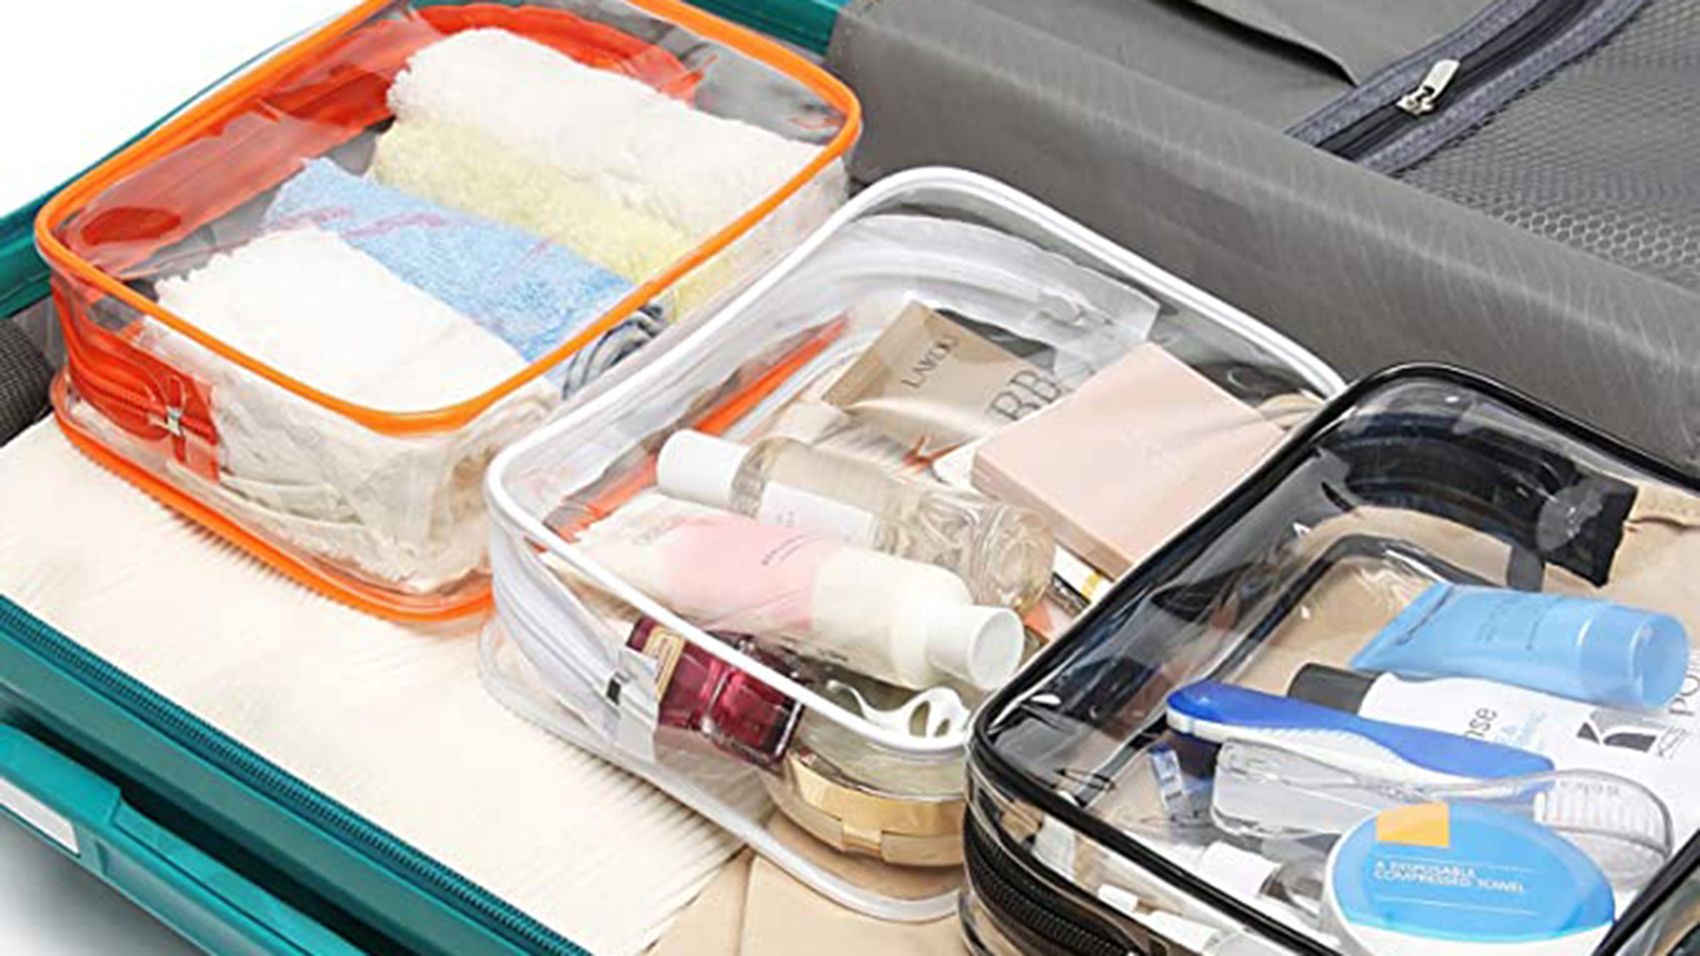 Best makeup bags and toiletry cases for travel